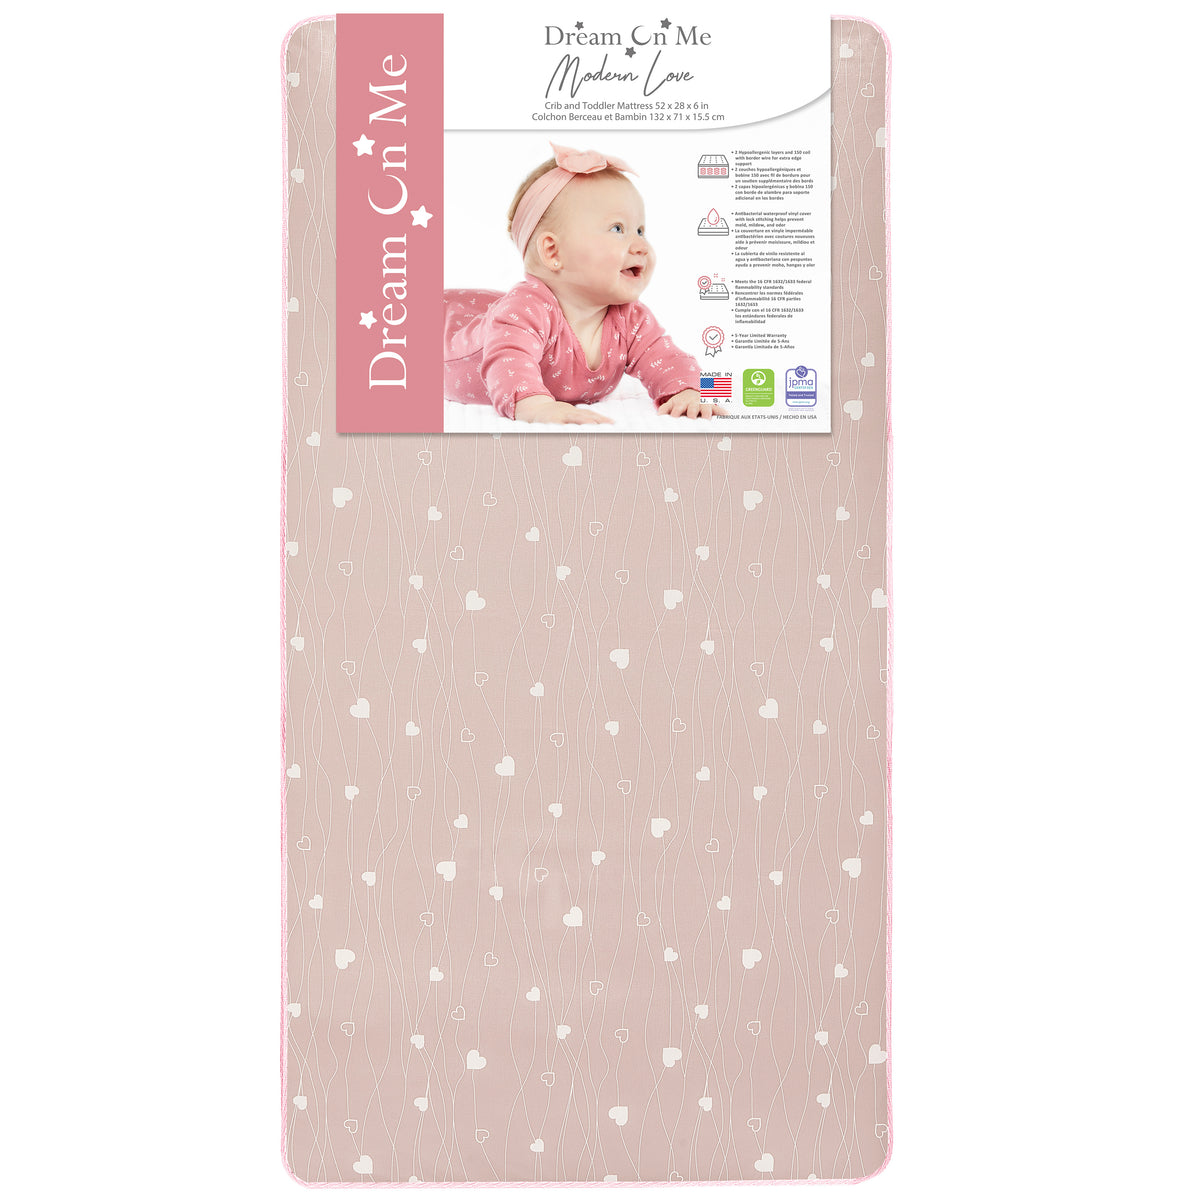 Pure Zen 2 in 1 Infant and Toddler Mattress